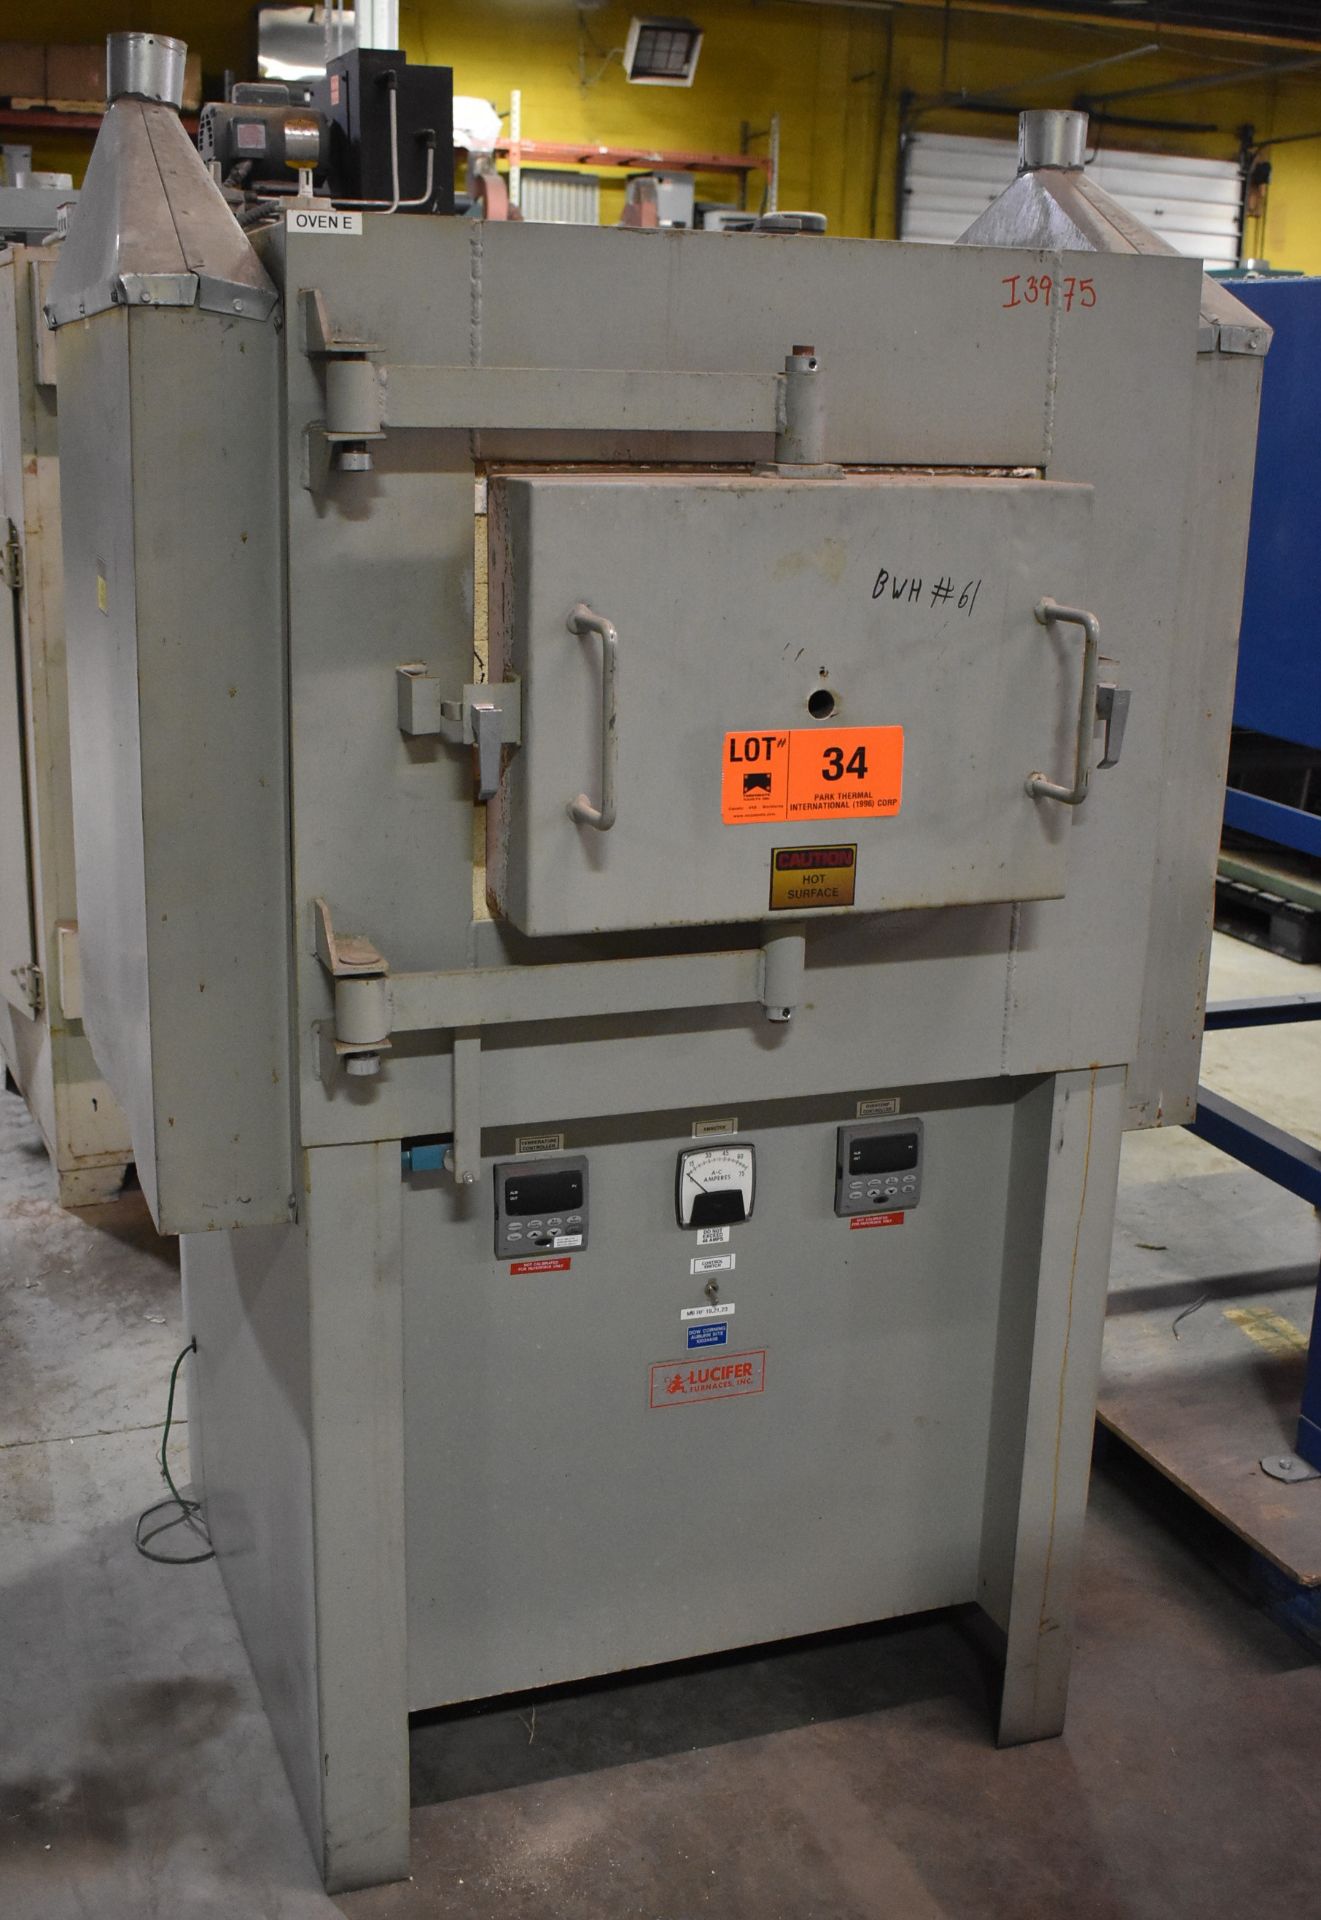 LUCIFER HS3-M24 ELECTRIC BOX FURNACE WITH 2450 DEG. F. MAX. TEMPERATURE, 18.5 KW, 12"X19"X23"D